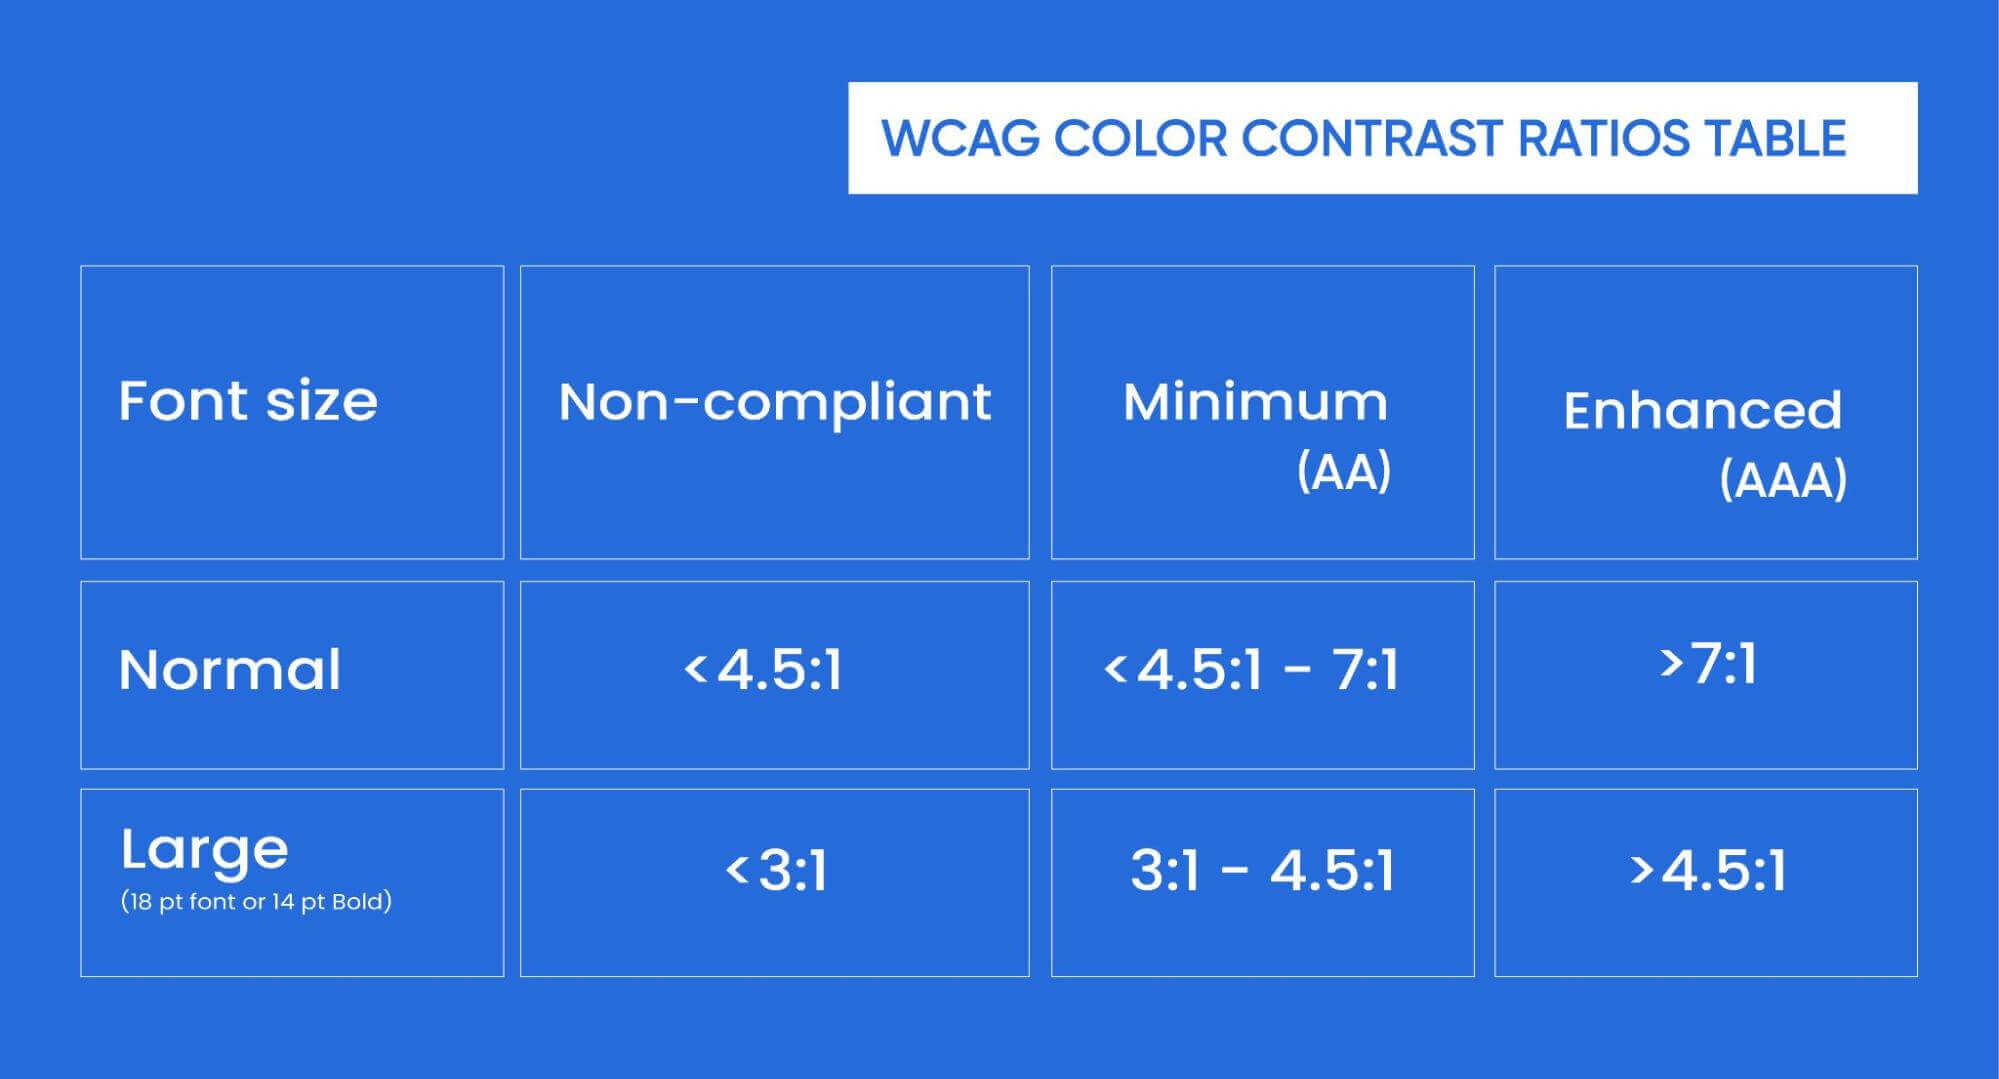 Visual representation of level AA and level AAA requirements of contrast ratio compliance.
